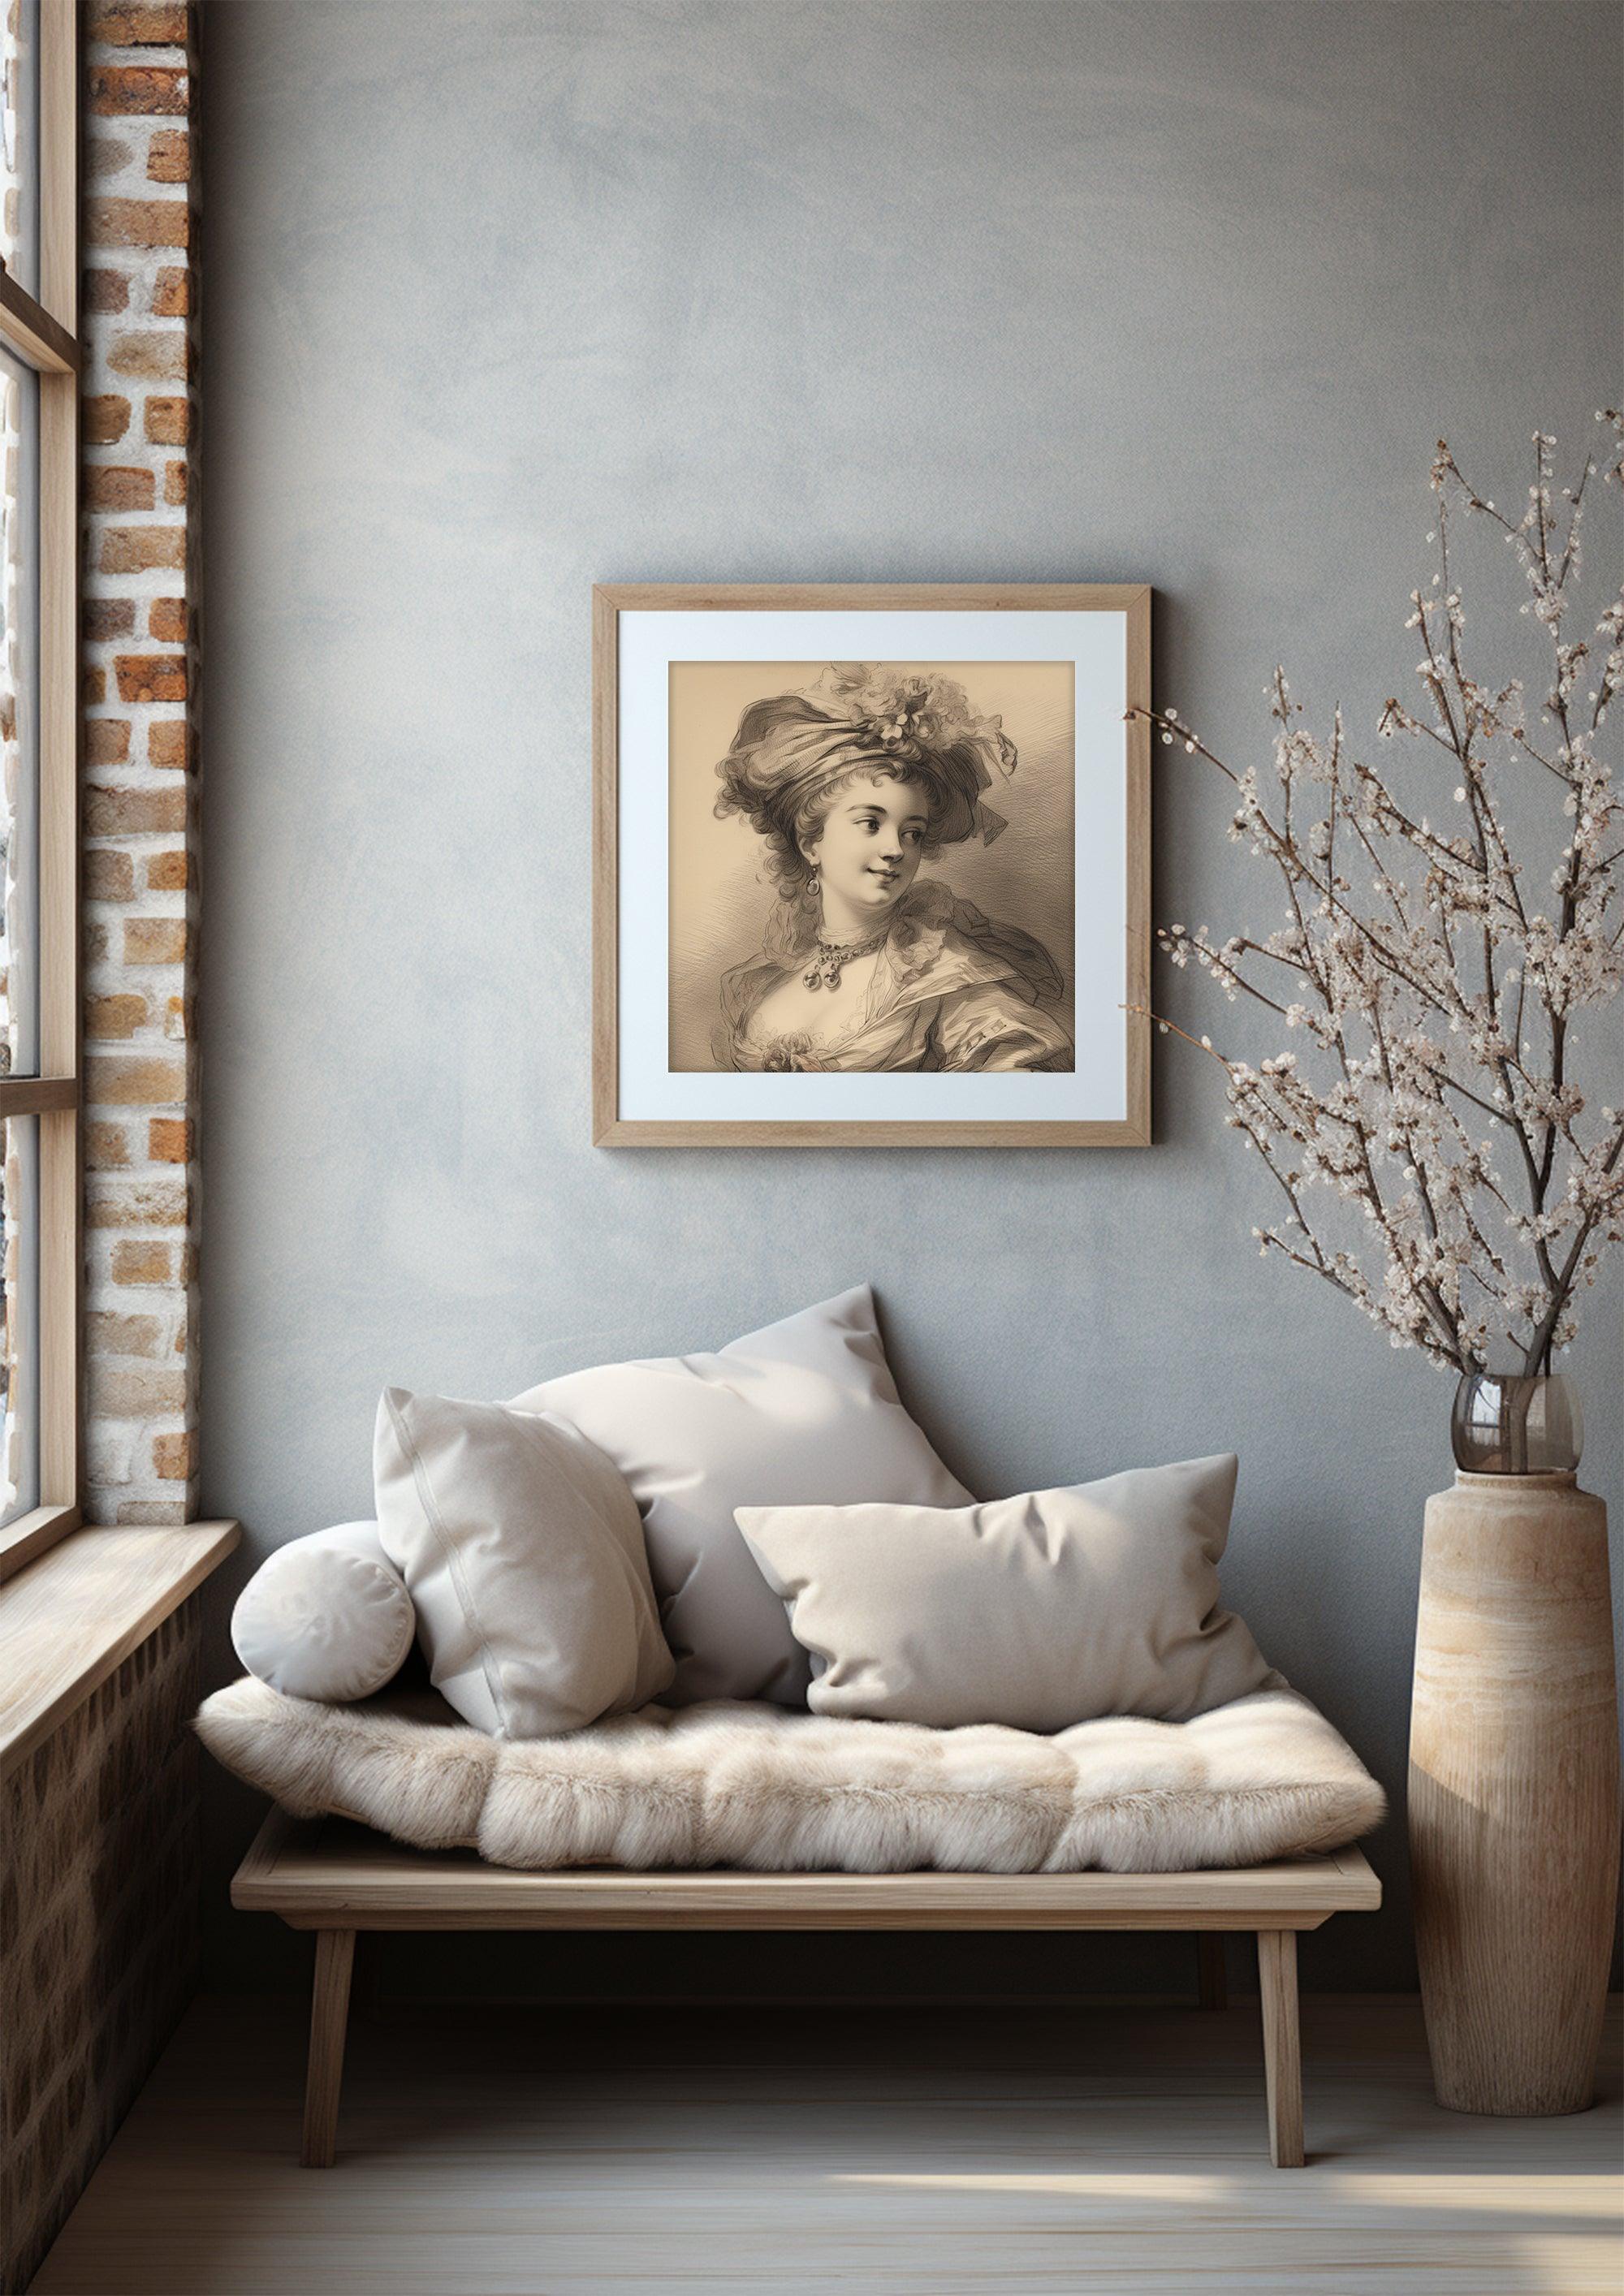 Classical Woman Portrait | Vintage Wall Art | Look ahead with deep emotion |Sketch etching printing |Moody Wall Decor |Home Decor Aesthetics|PRINTABLE Art |Digital Download